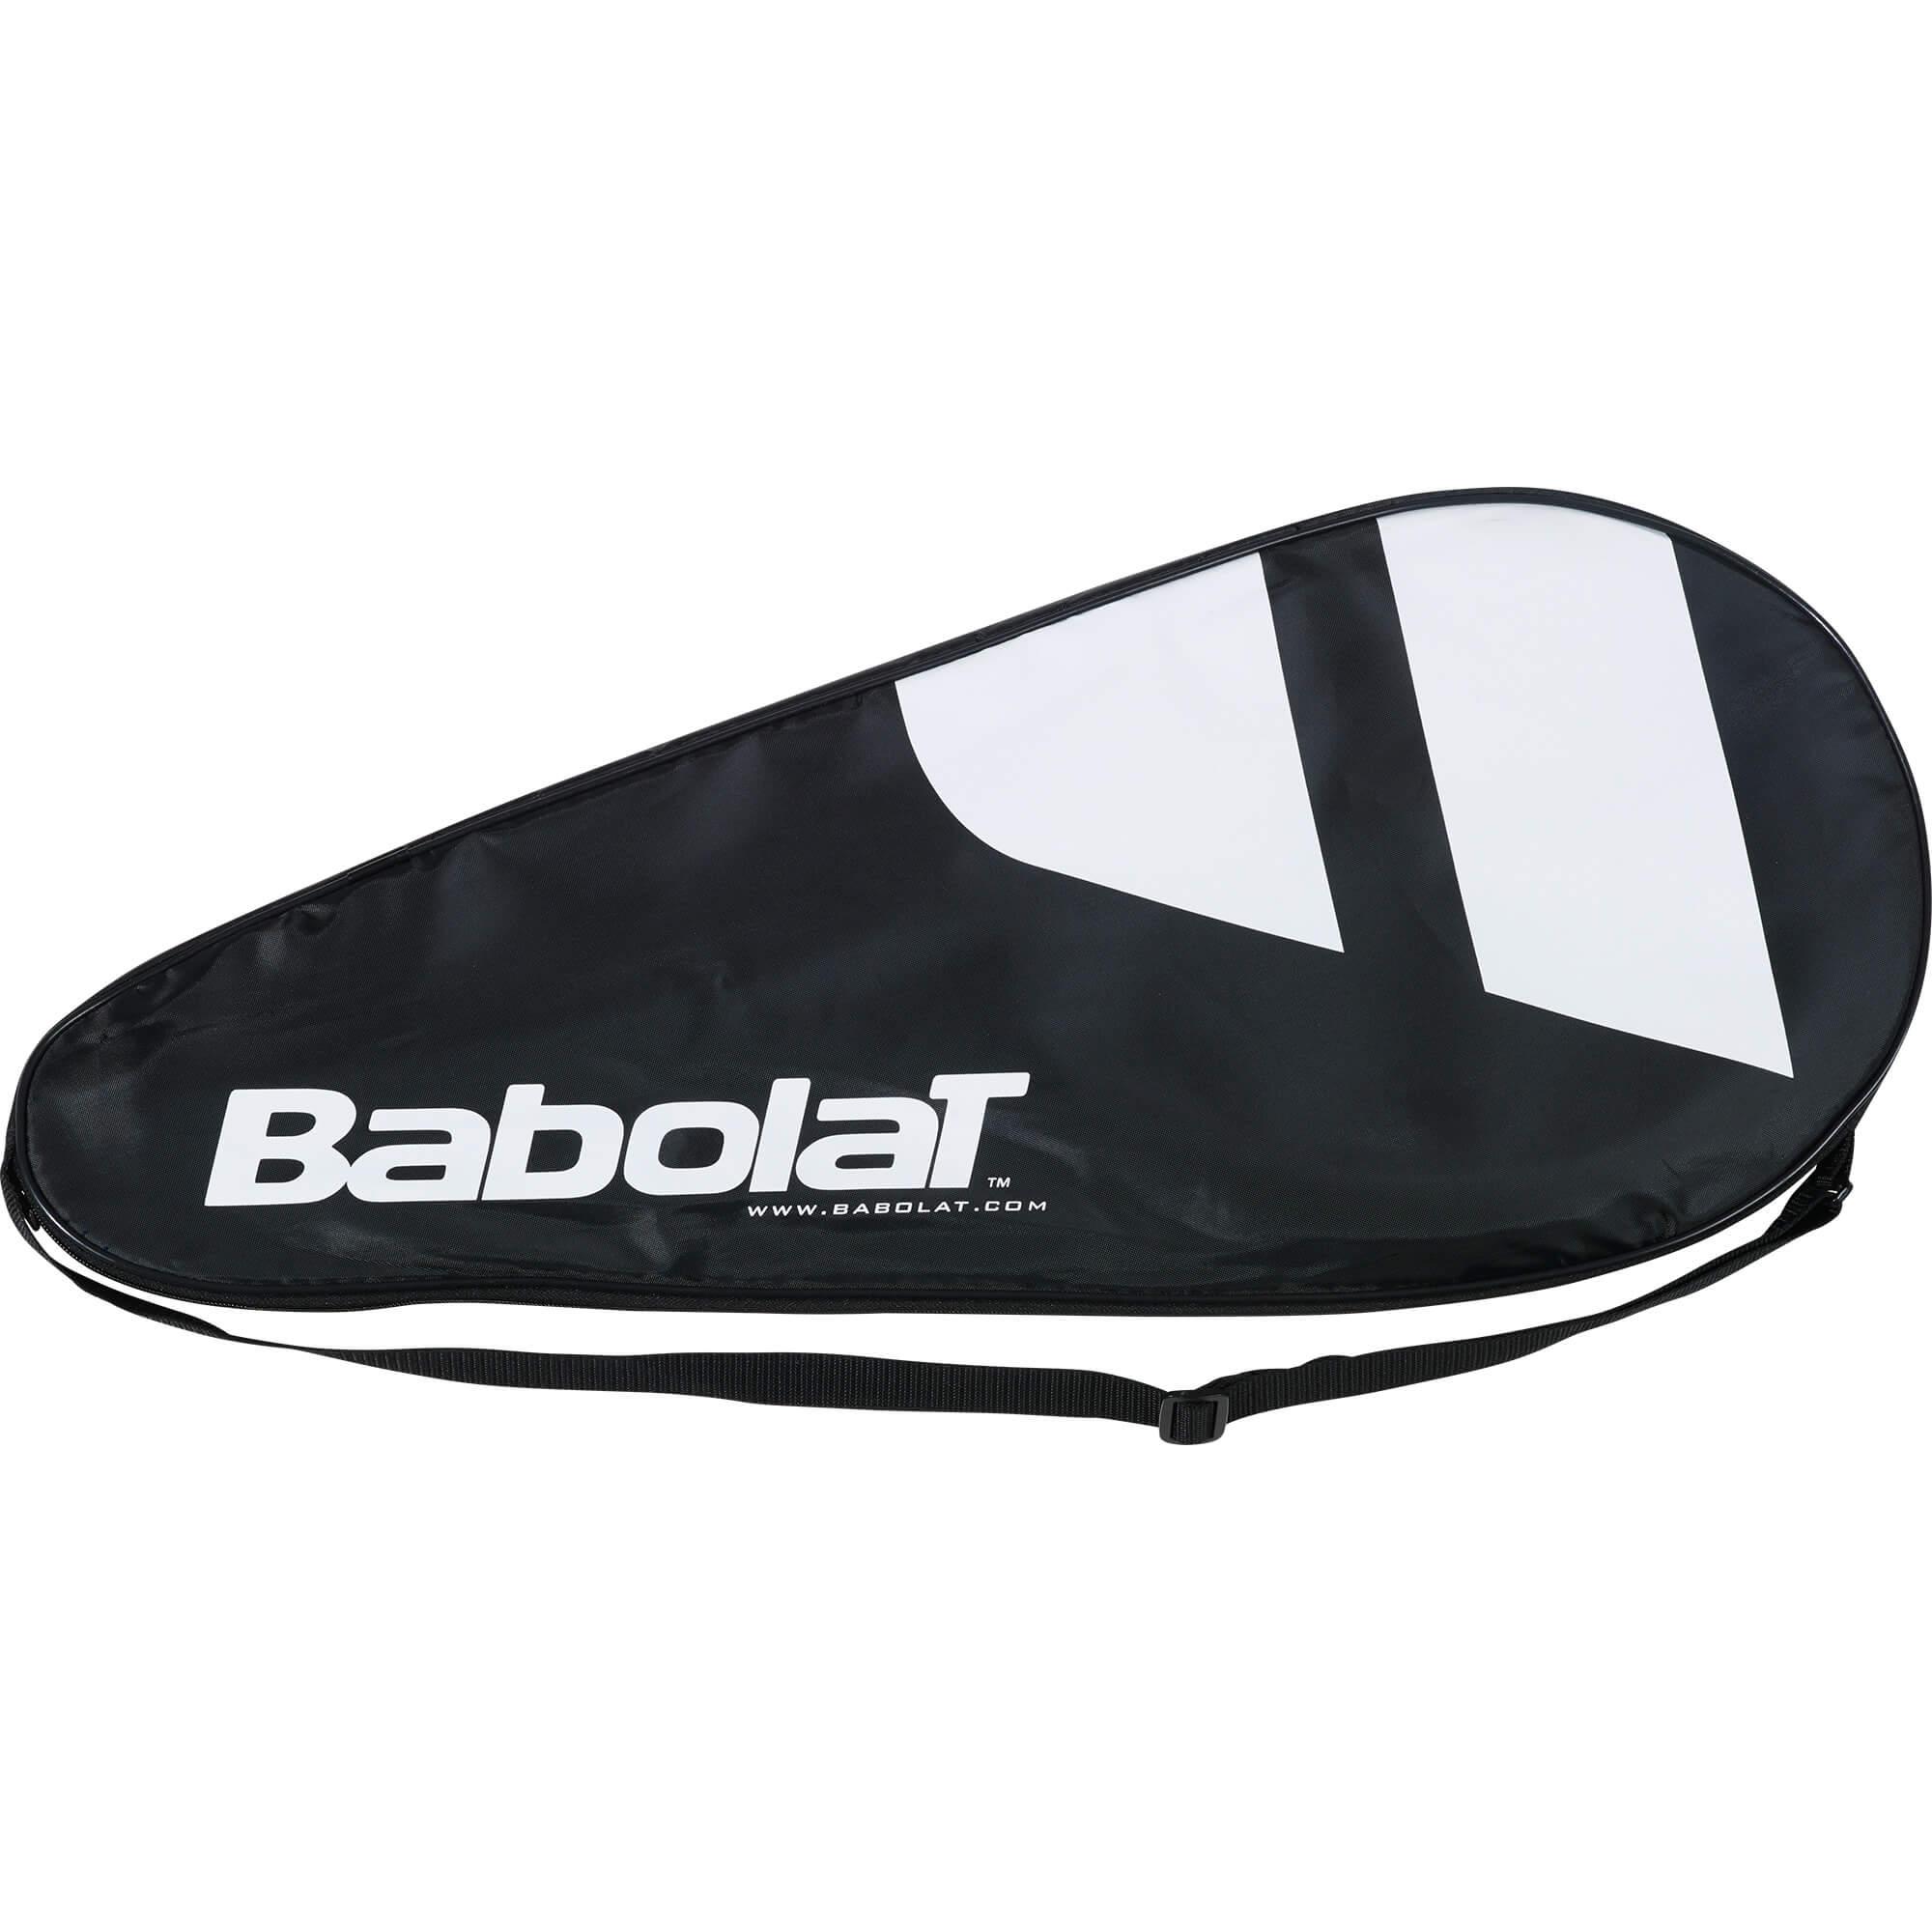 Babolat Tennis Racket Cover Brand New!